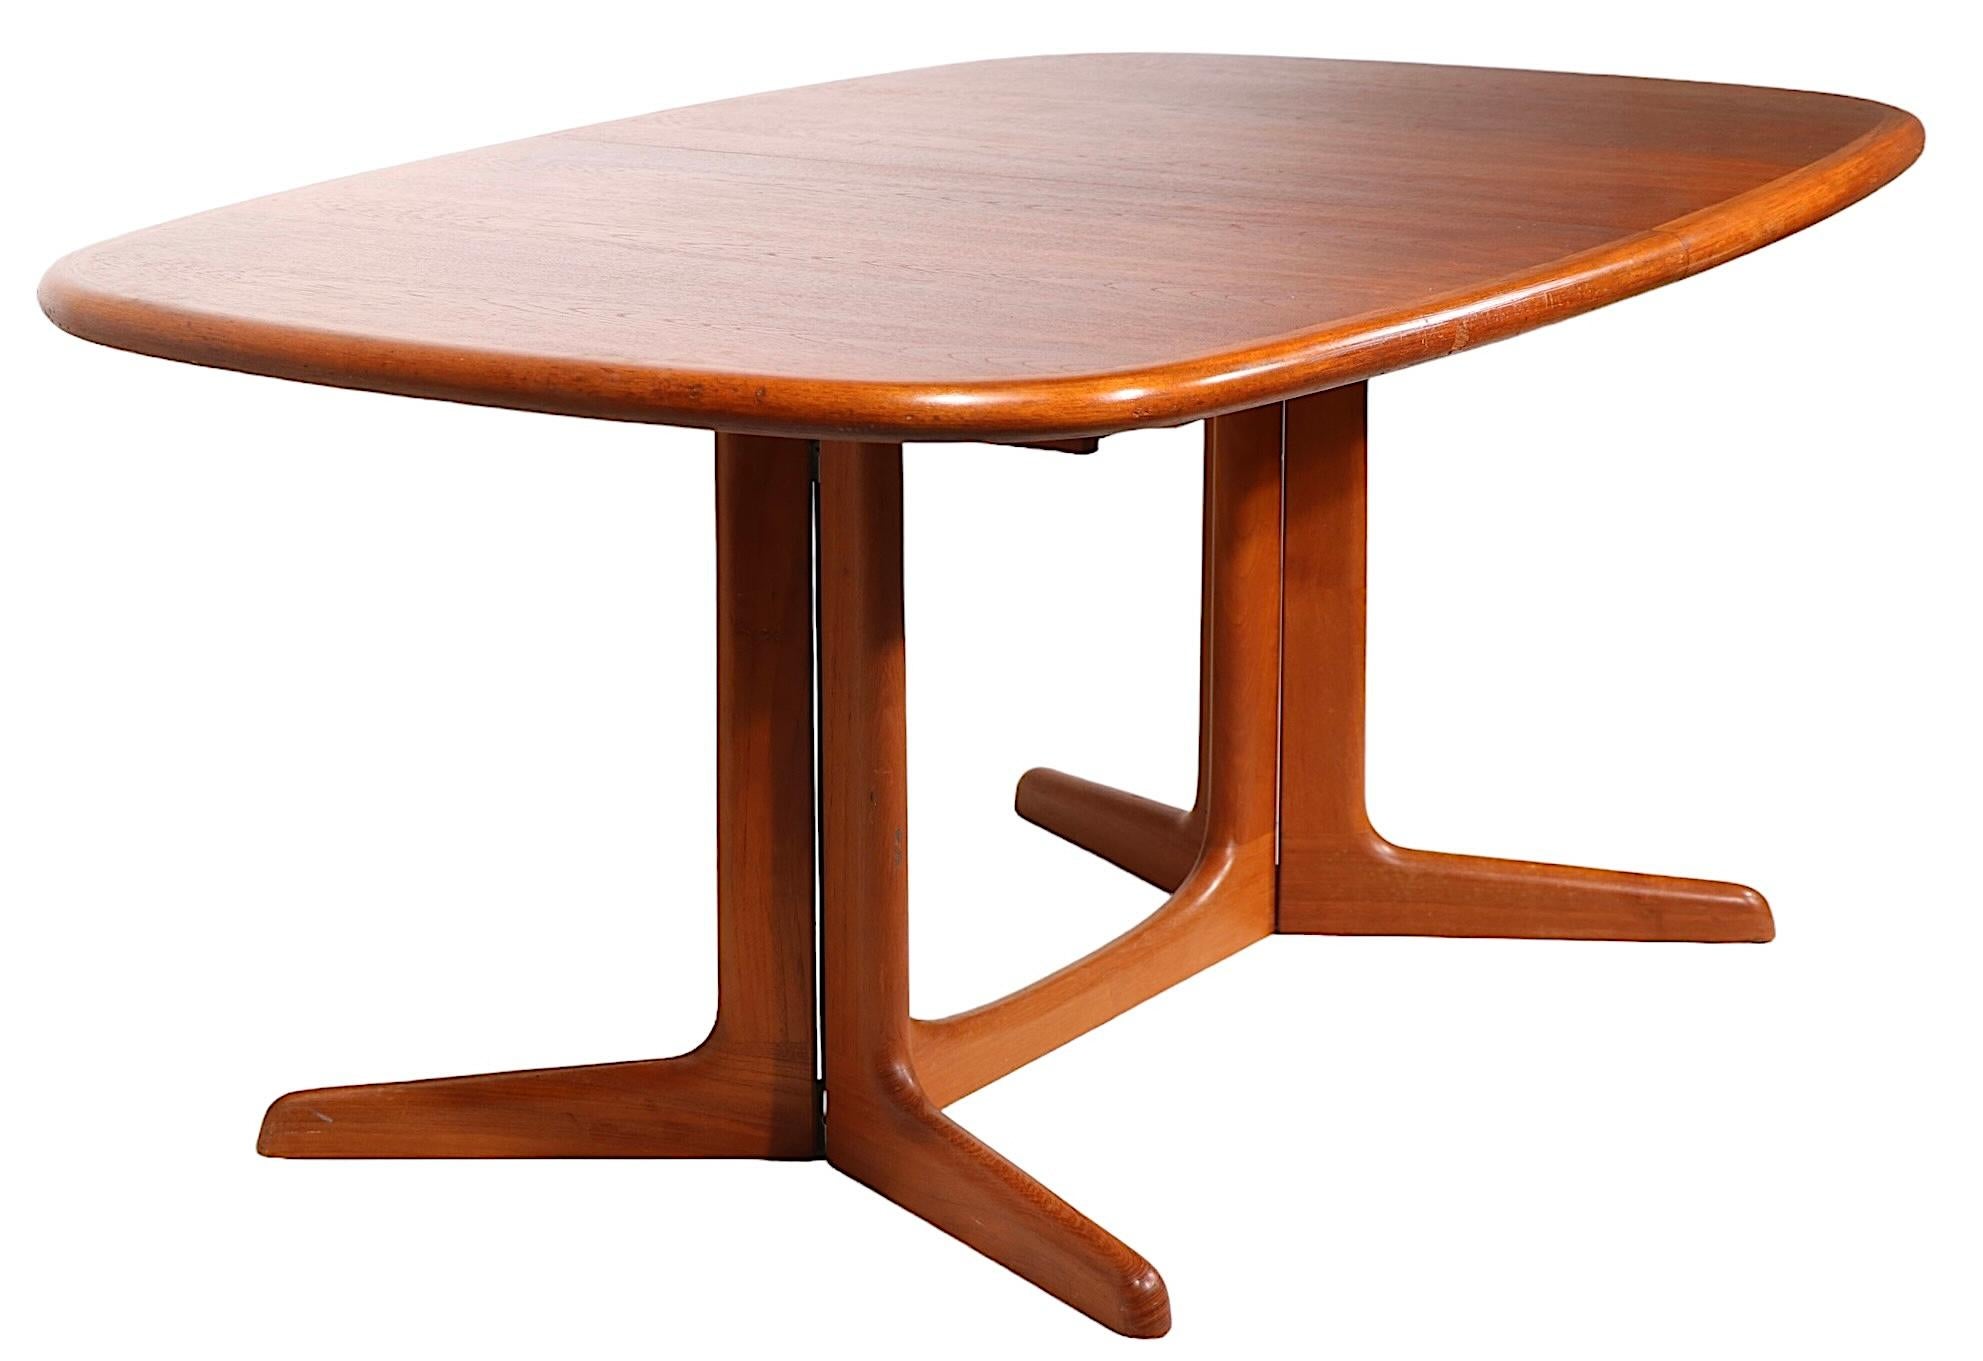 Danish Mid Century Oval Teak Dining Table by Niels Otto Moller for Gudme c 1970s For Sale 1